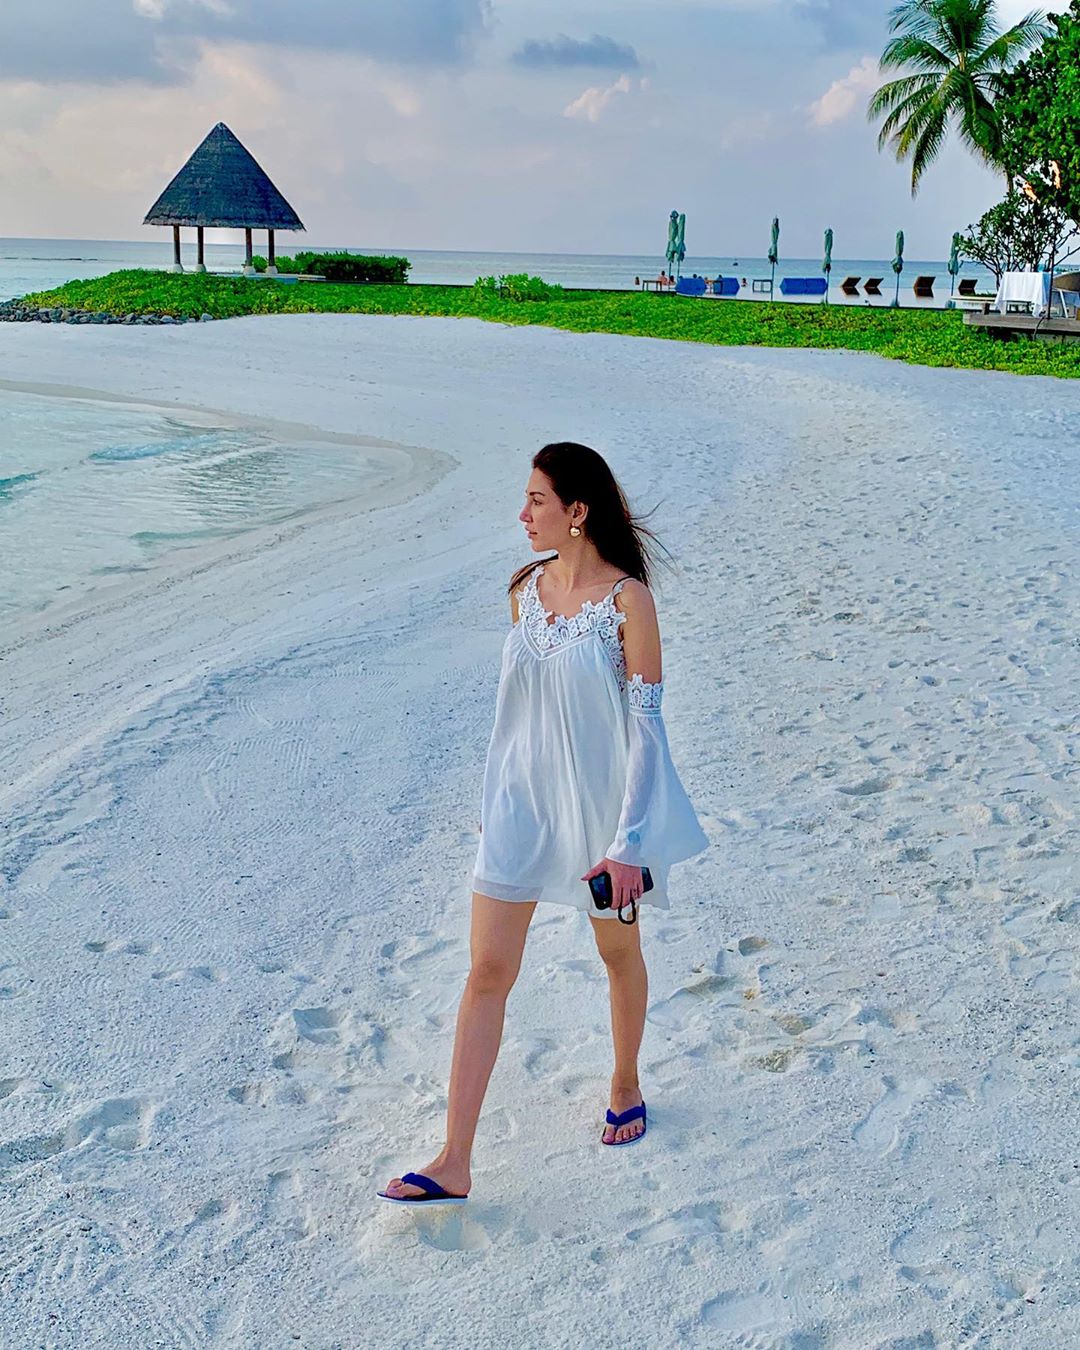 Blue Water & Beach - Model Abeer Rizvi Awesome Clicks from Maldives